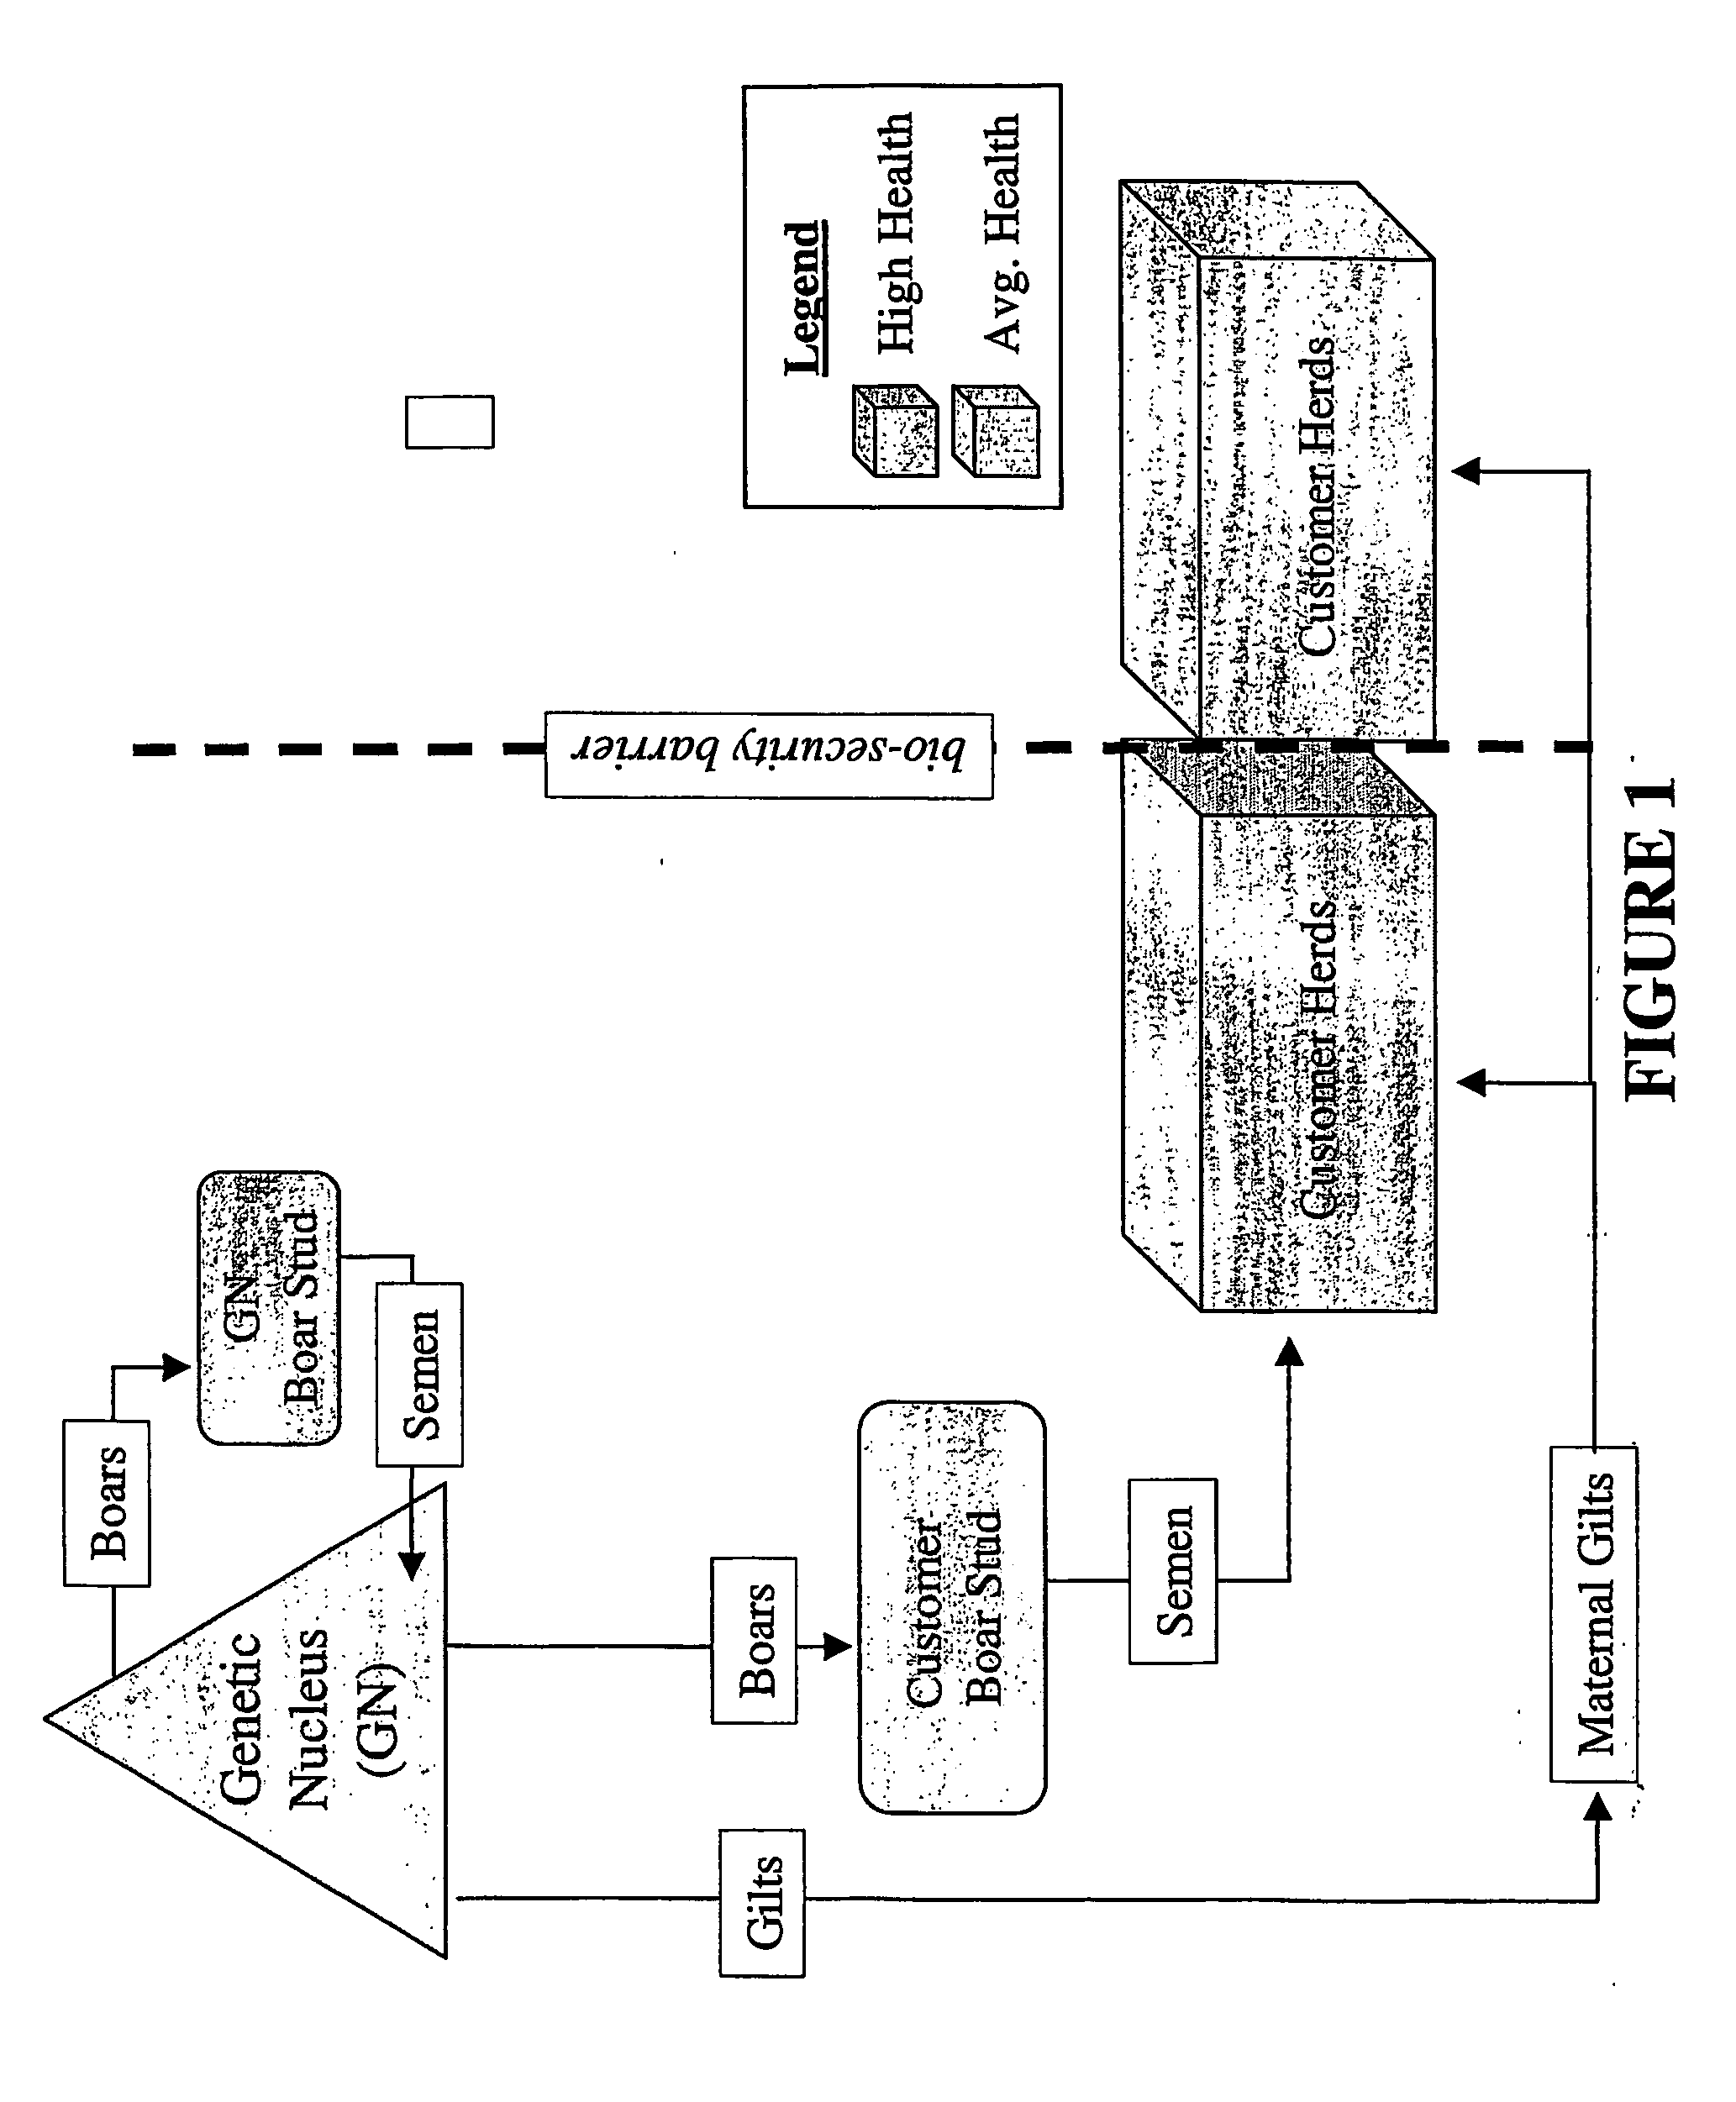 Method for Genetic Improvement of Terminal Boars